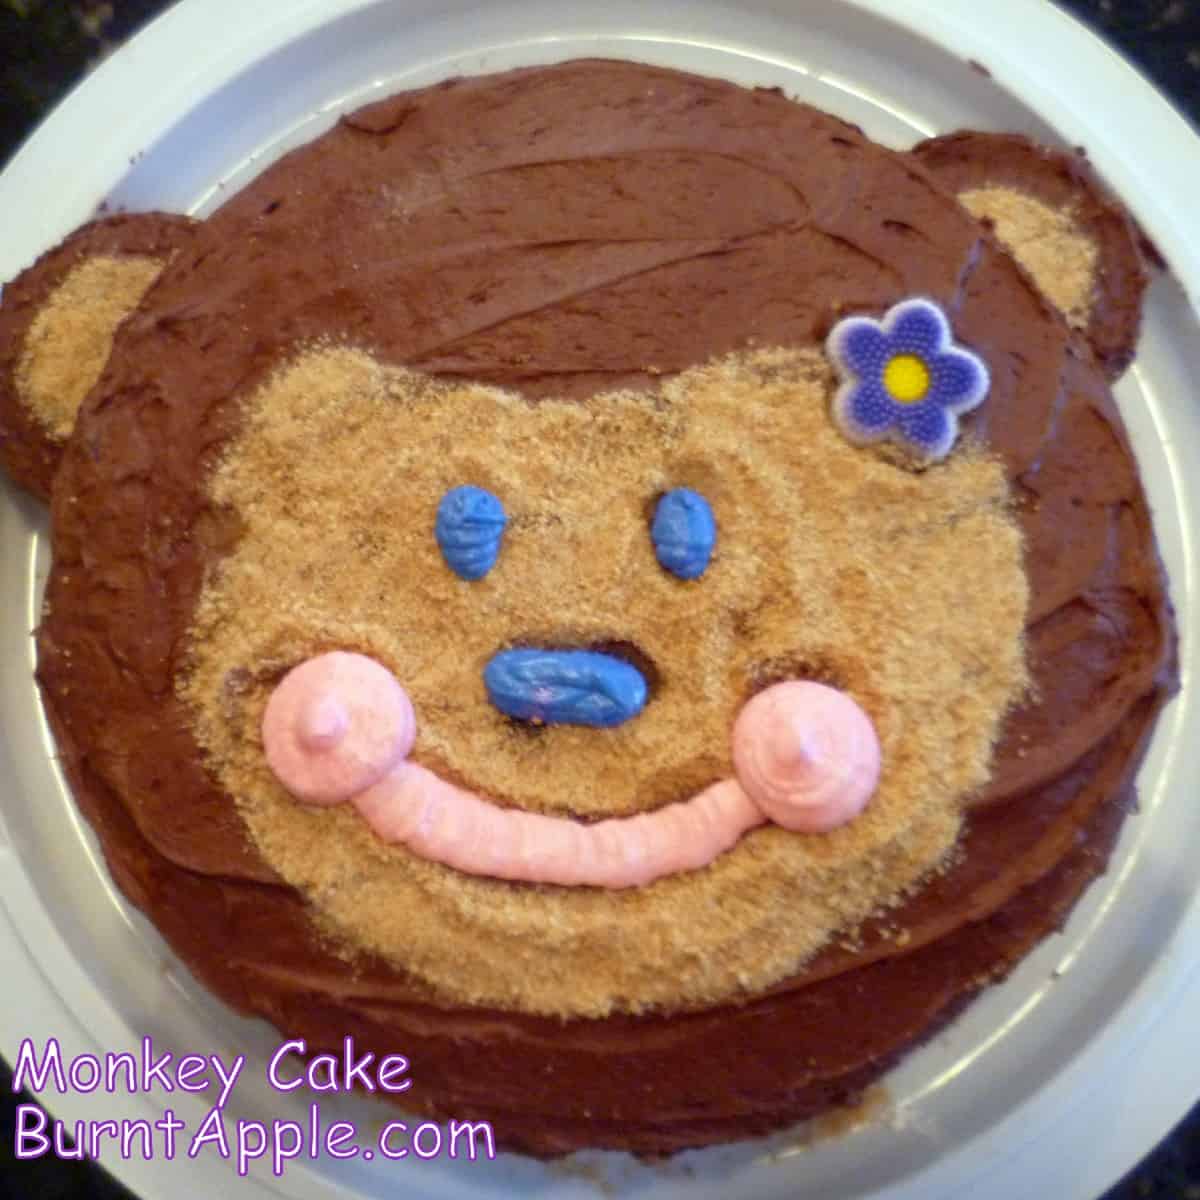 A round cake with a monkey-shaped face made of brown frosting and graham cracker crumbs. The cake has two purrple frosting eyes, a pink nose, and a mouth made of pink frosting.